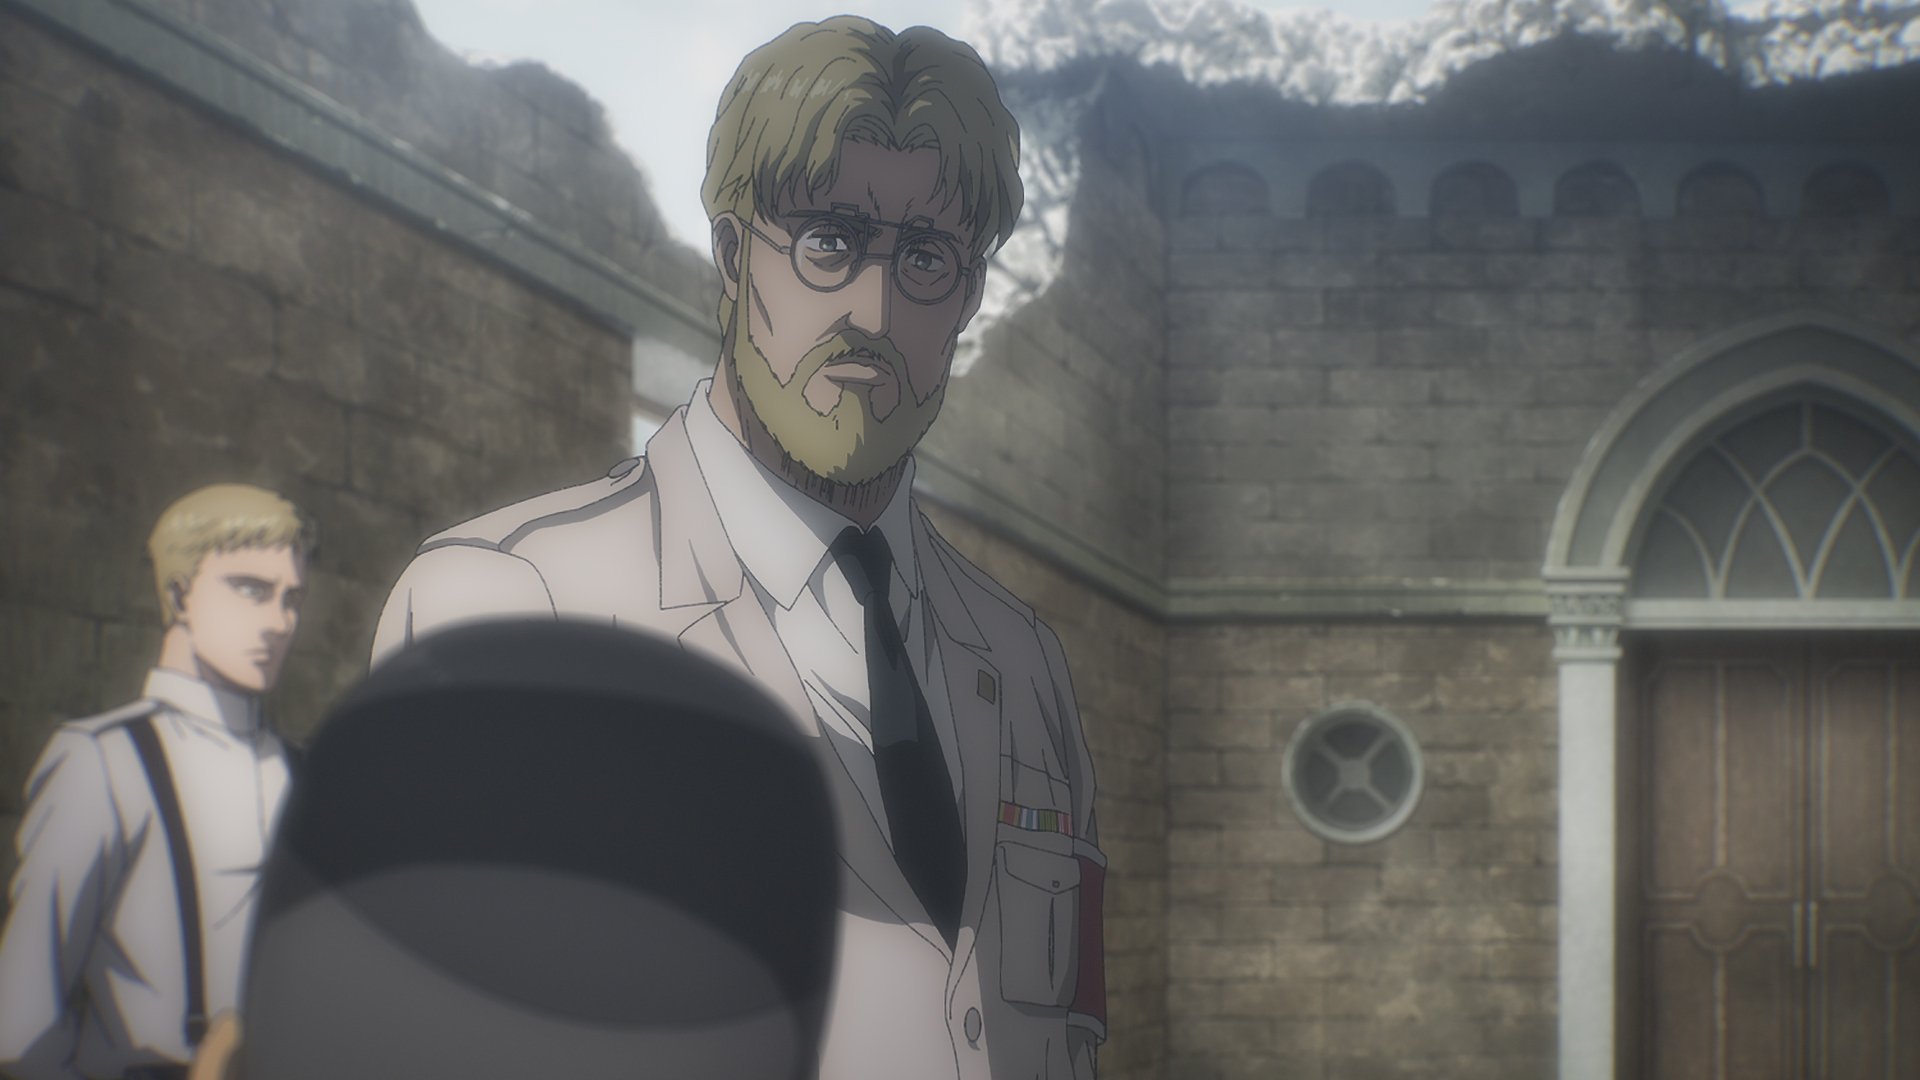 Zeke Jaeger in 'Attack on Titan' Season 4 Part 1. He's wearing a beige uniform and looking down at someone.